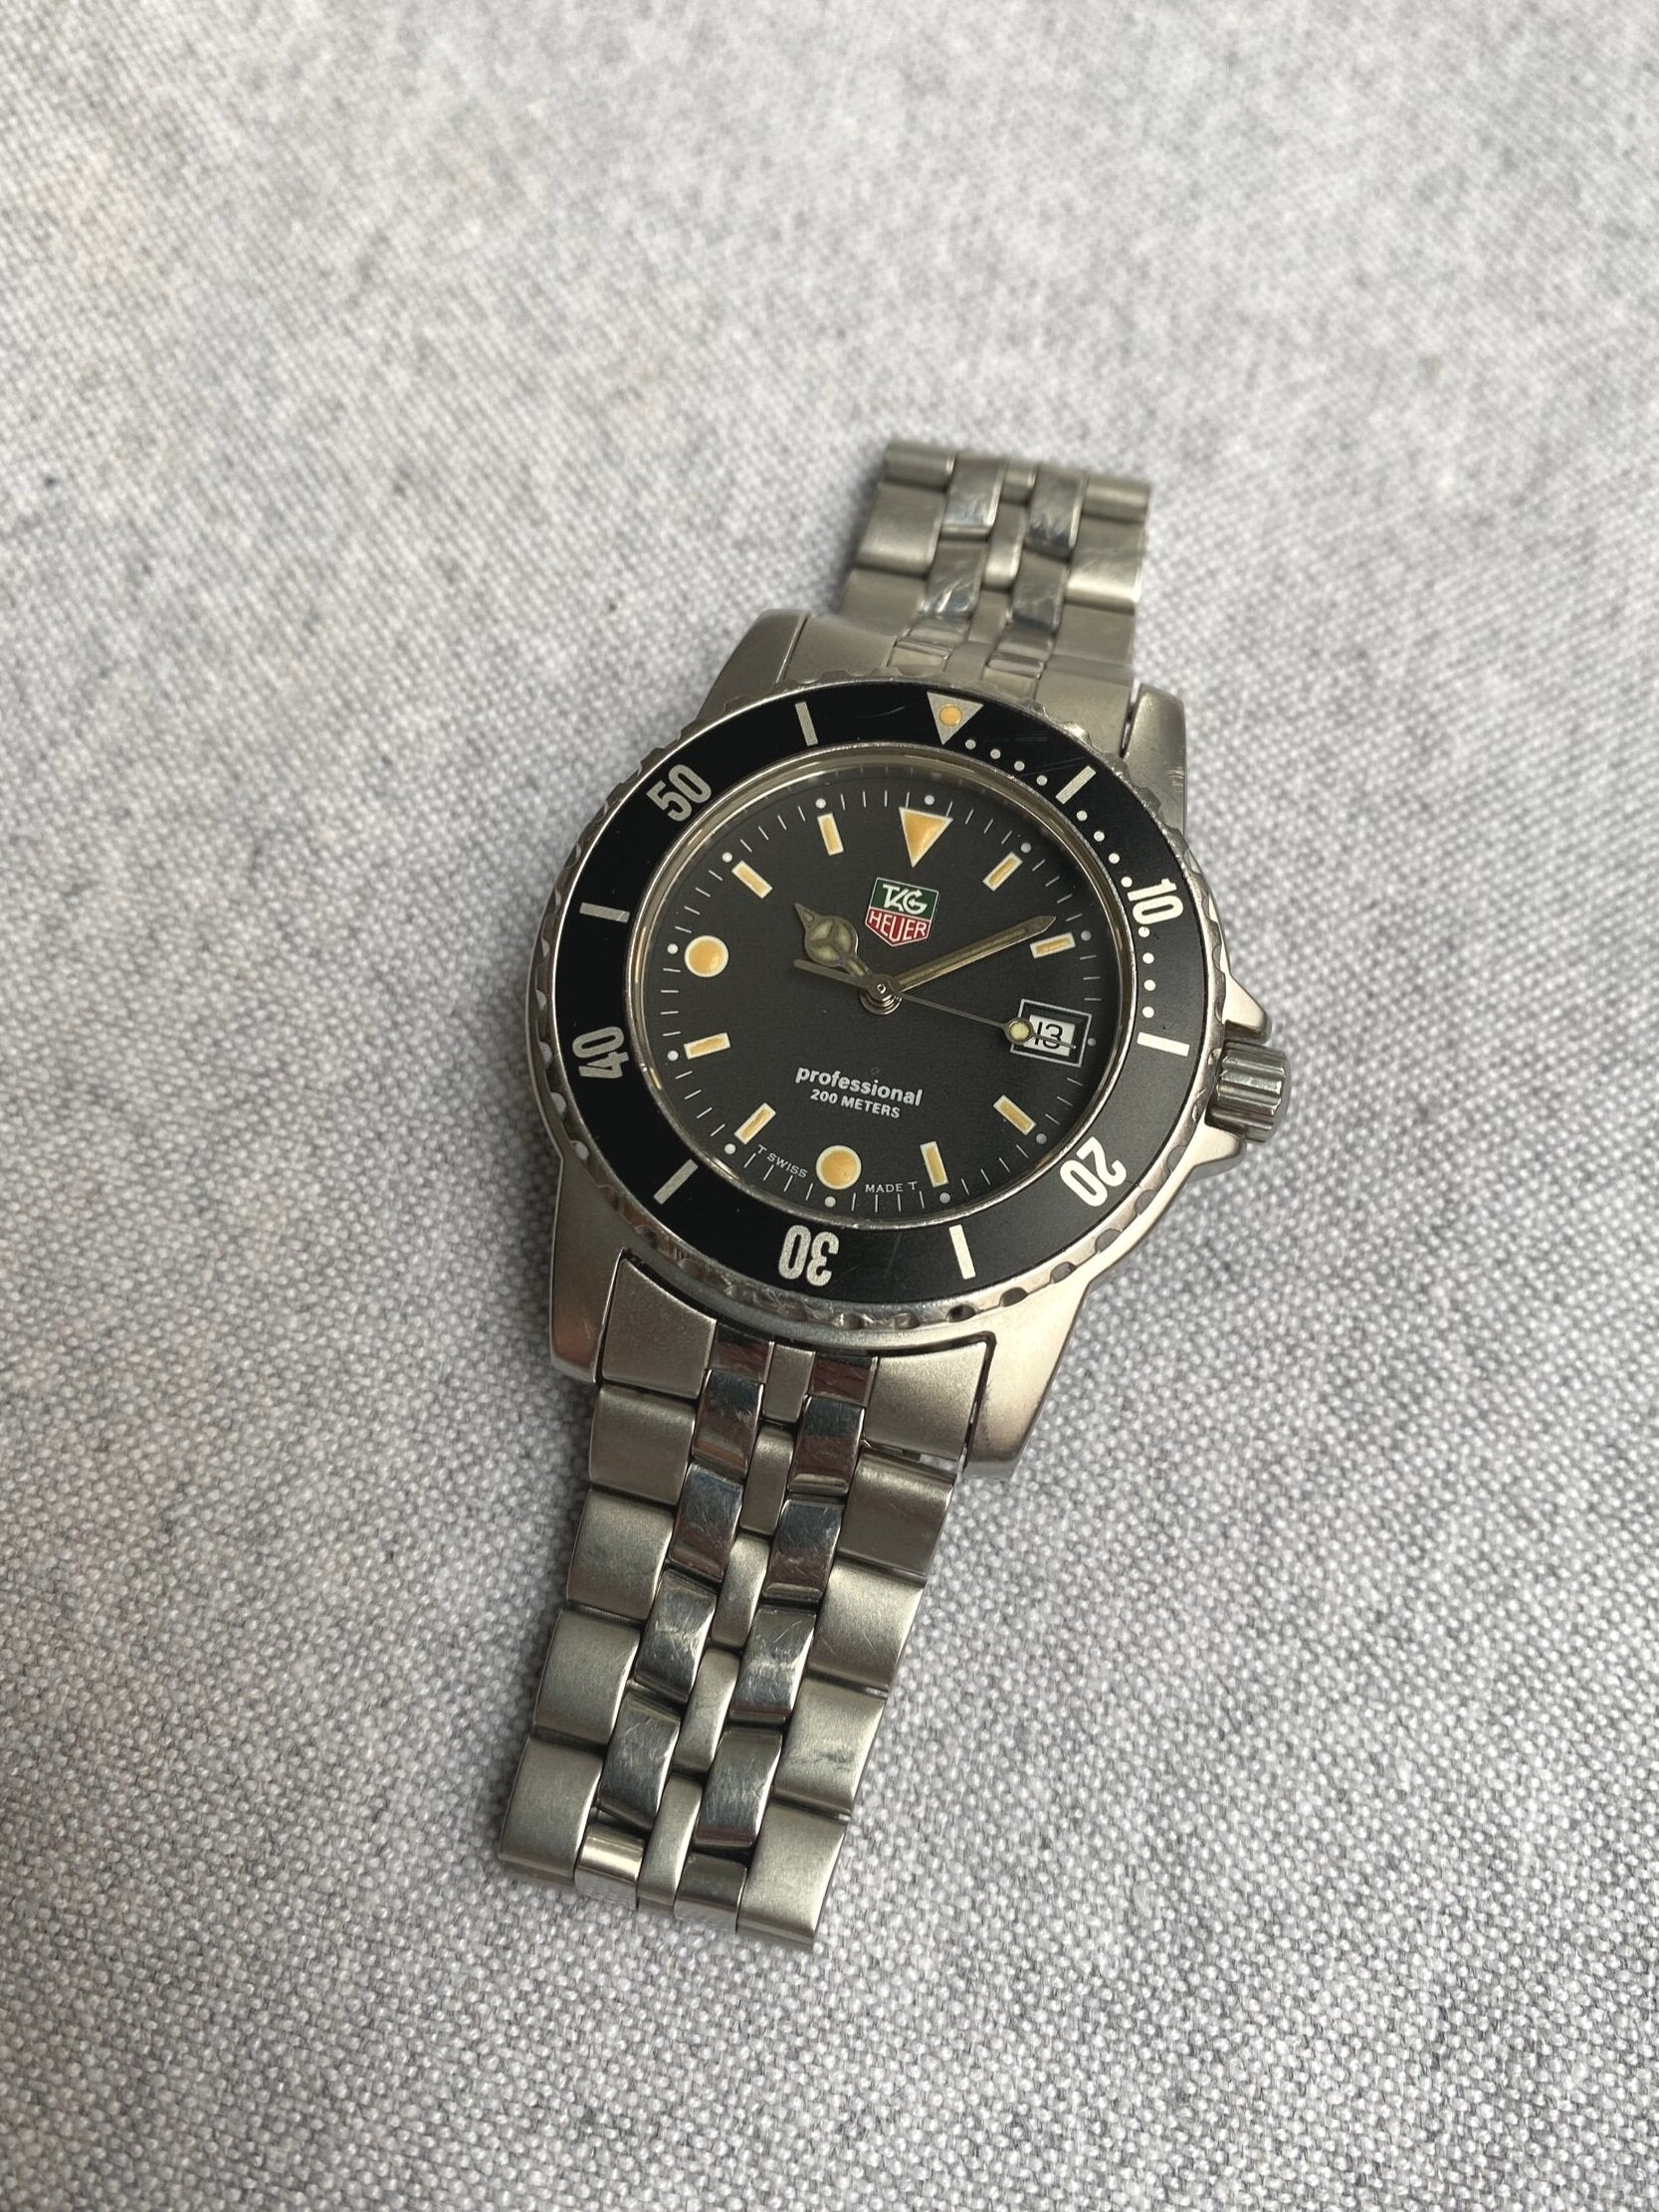 1980s Tag Heuer Professional 1500 series